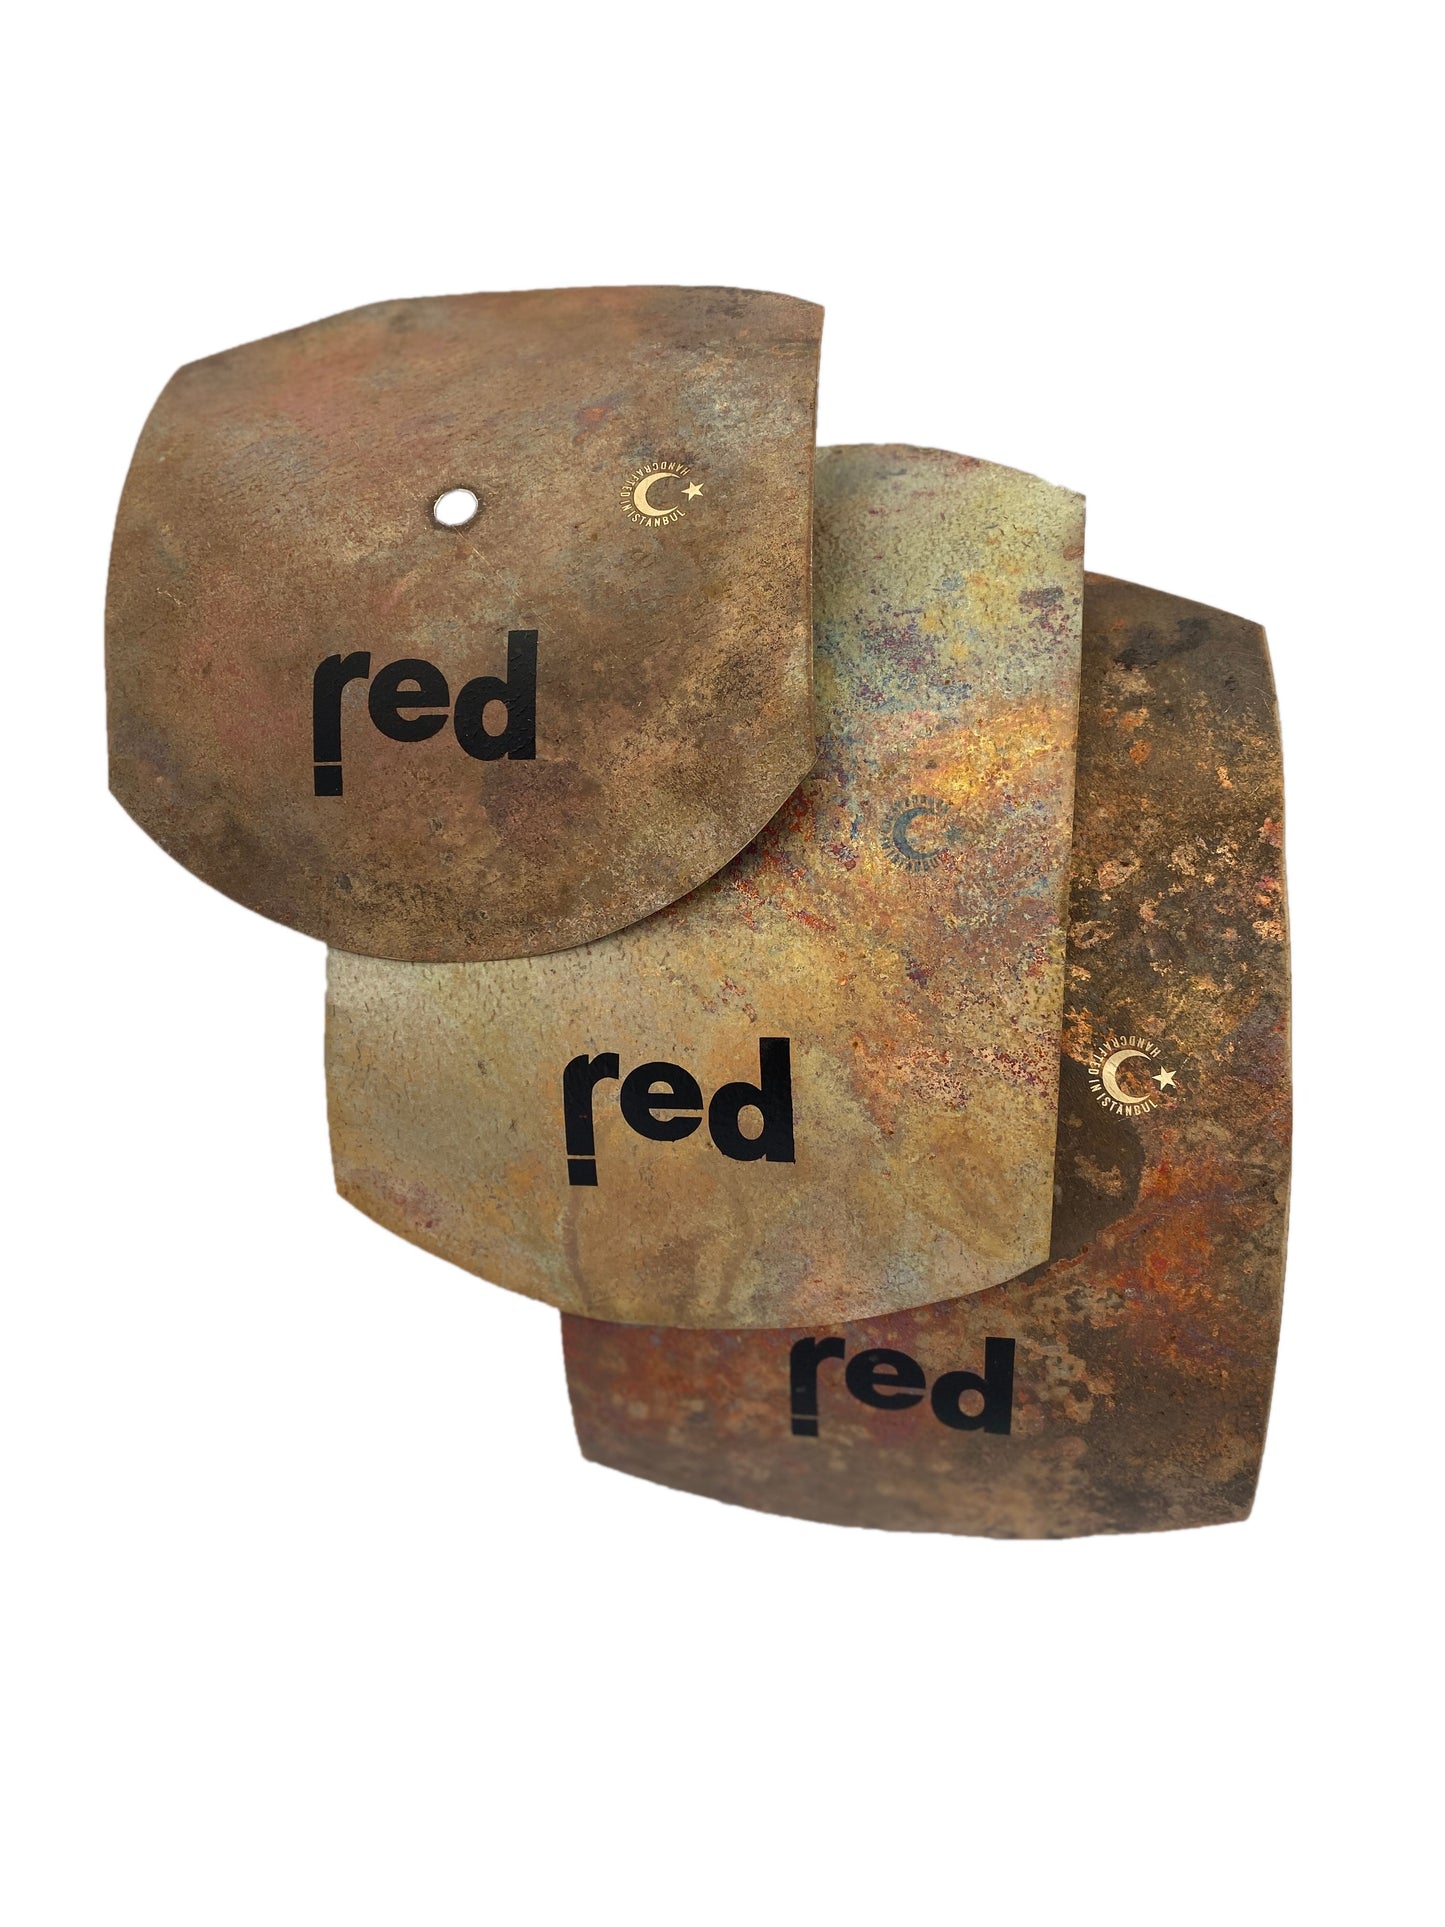 Red Cymbals 'Raw' Series 888 Snap Stack